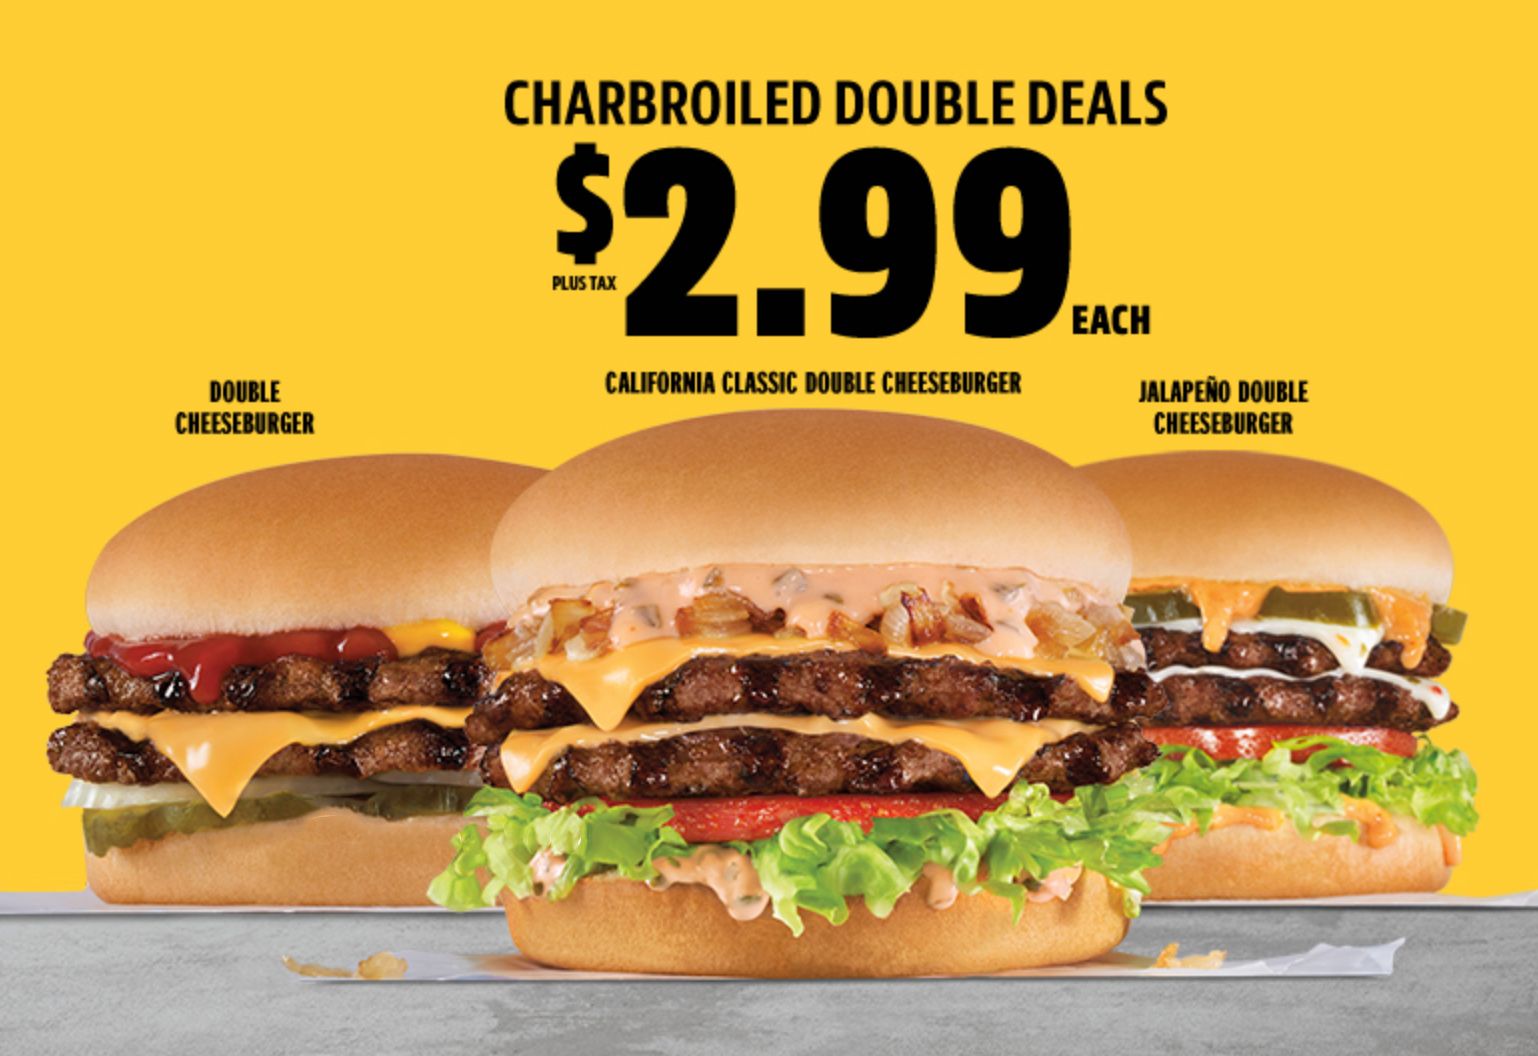 Carl's Jr. Announces their New 2.99 Charbroiled Double Deals Menu with